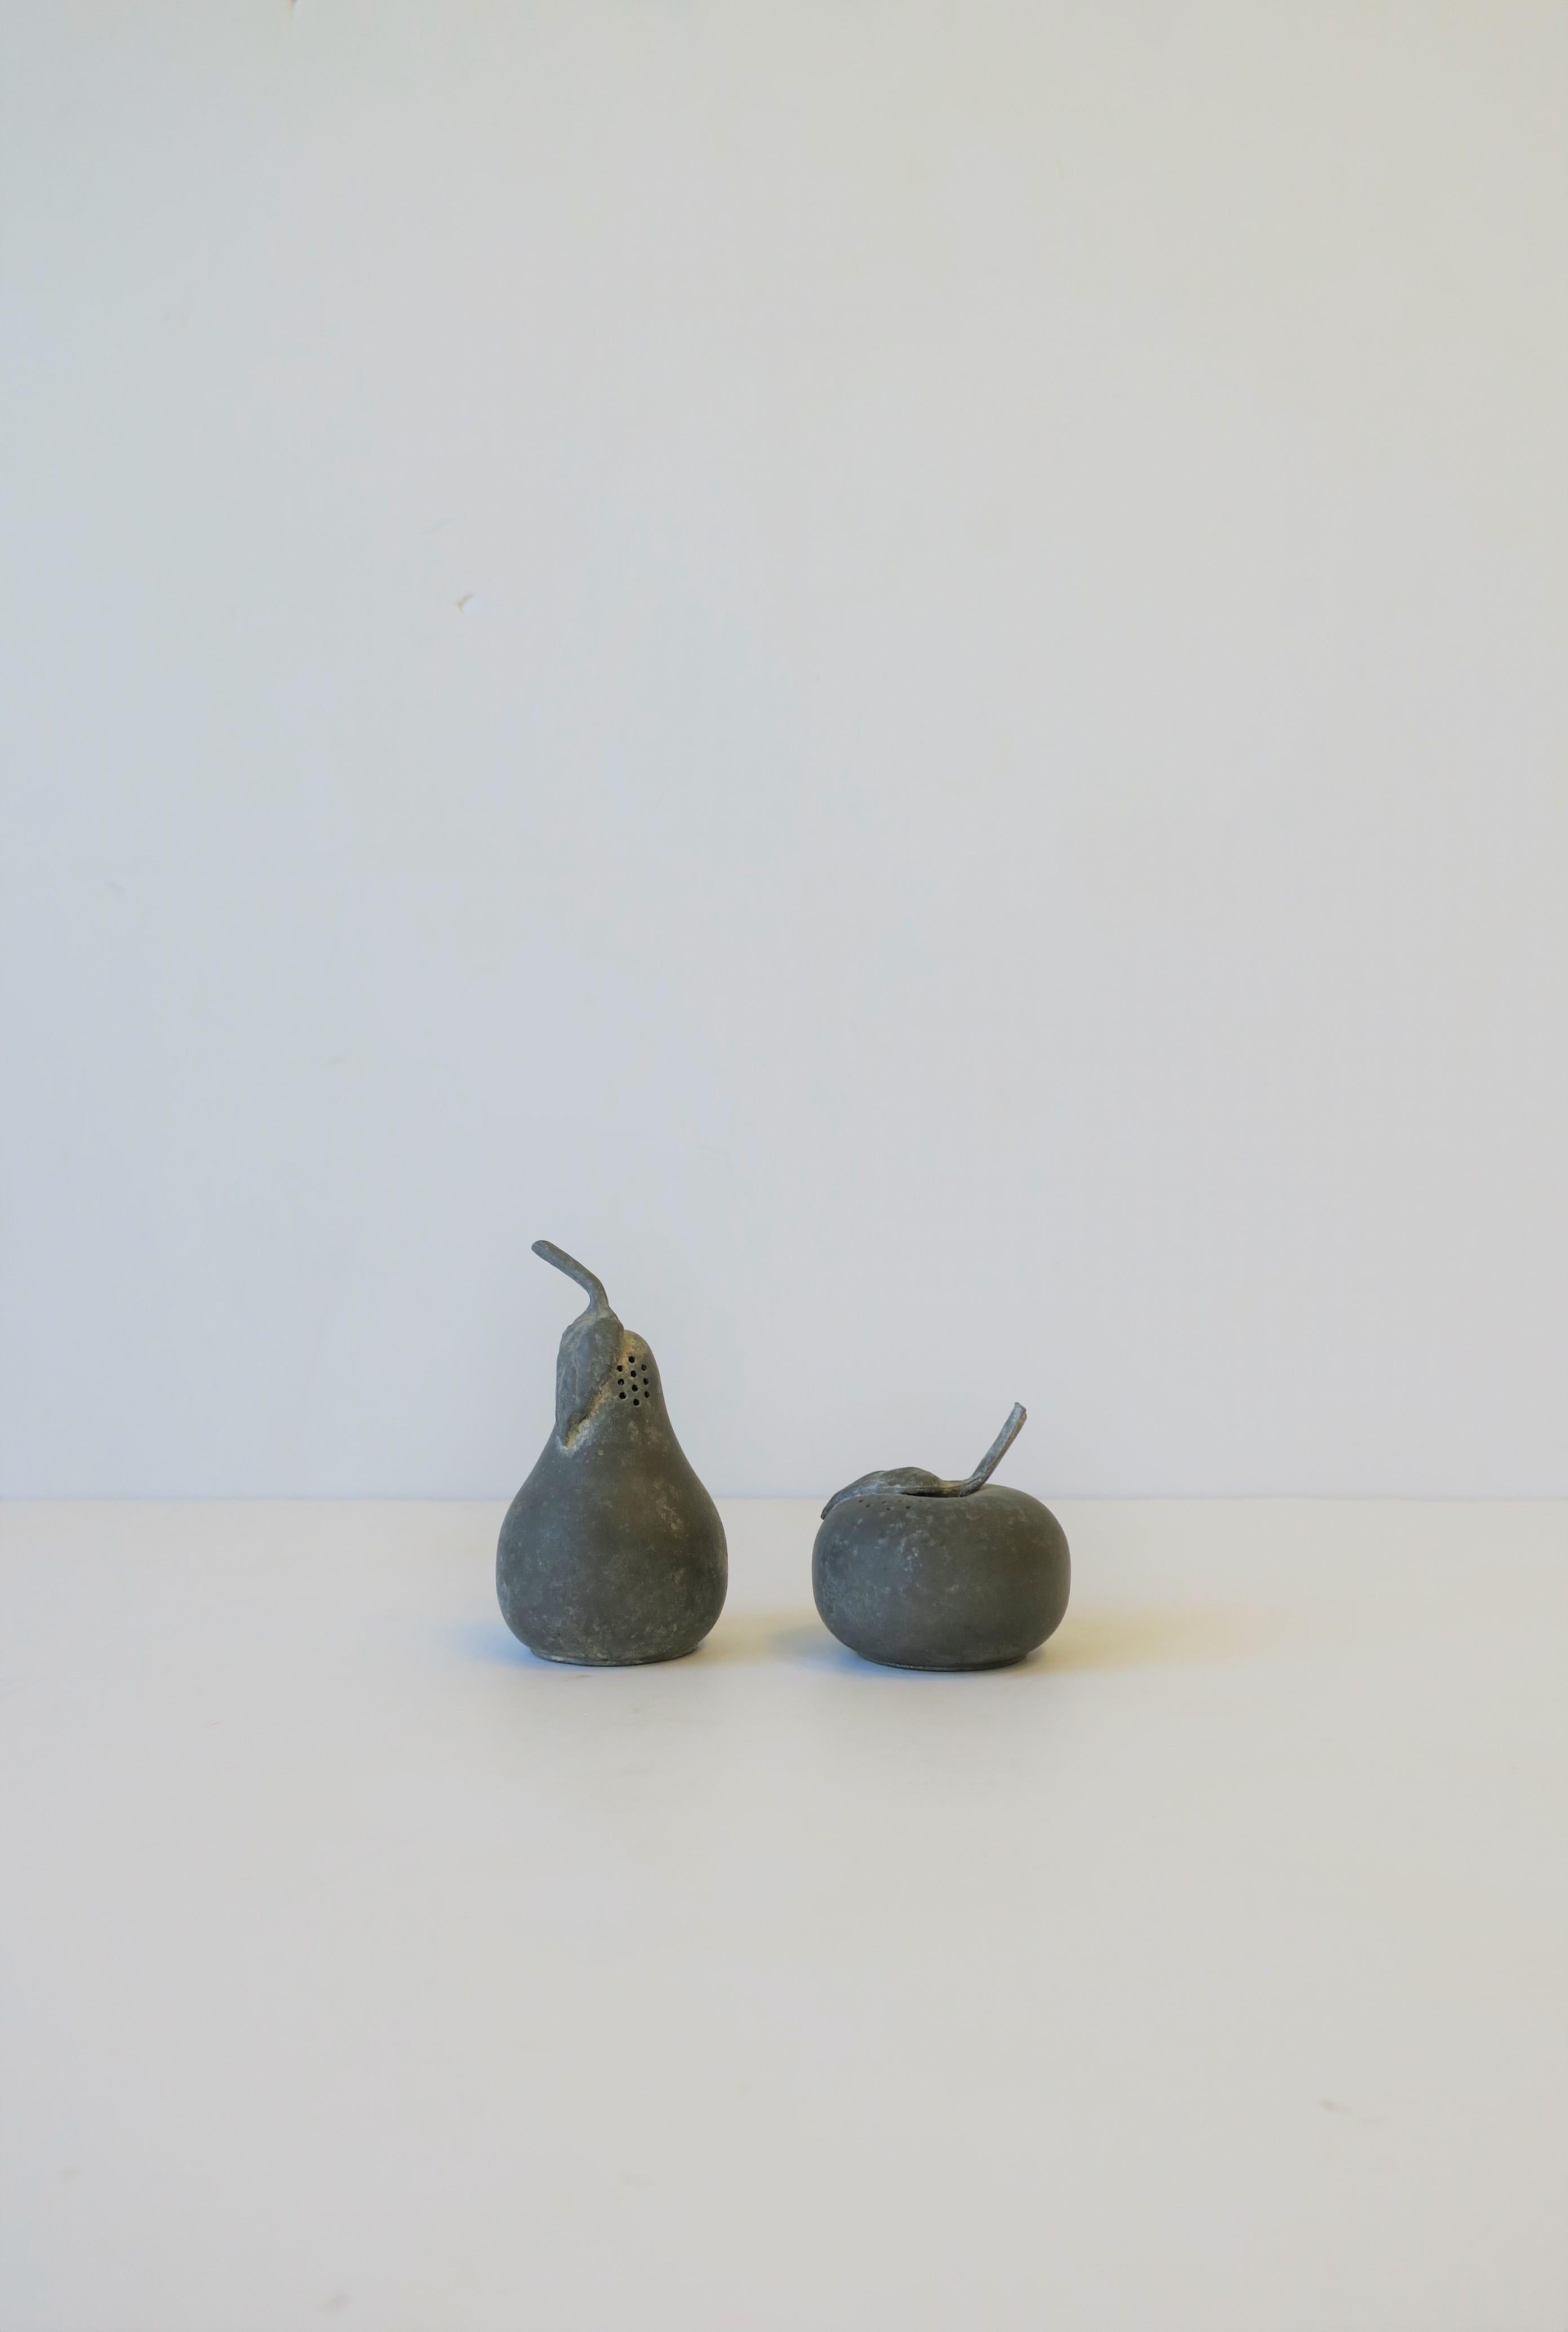 A set of weathered small pewter fruit (pear and apple) salt and pepper shakers, or, alternatively as decorative objects, circa mid-20th century. With maker's mark on bottom as shown in images #8 and 9.

Measurements L to R from image #1:
3